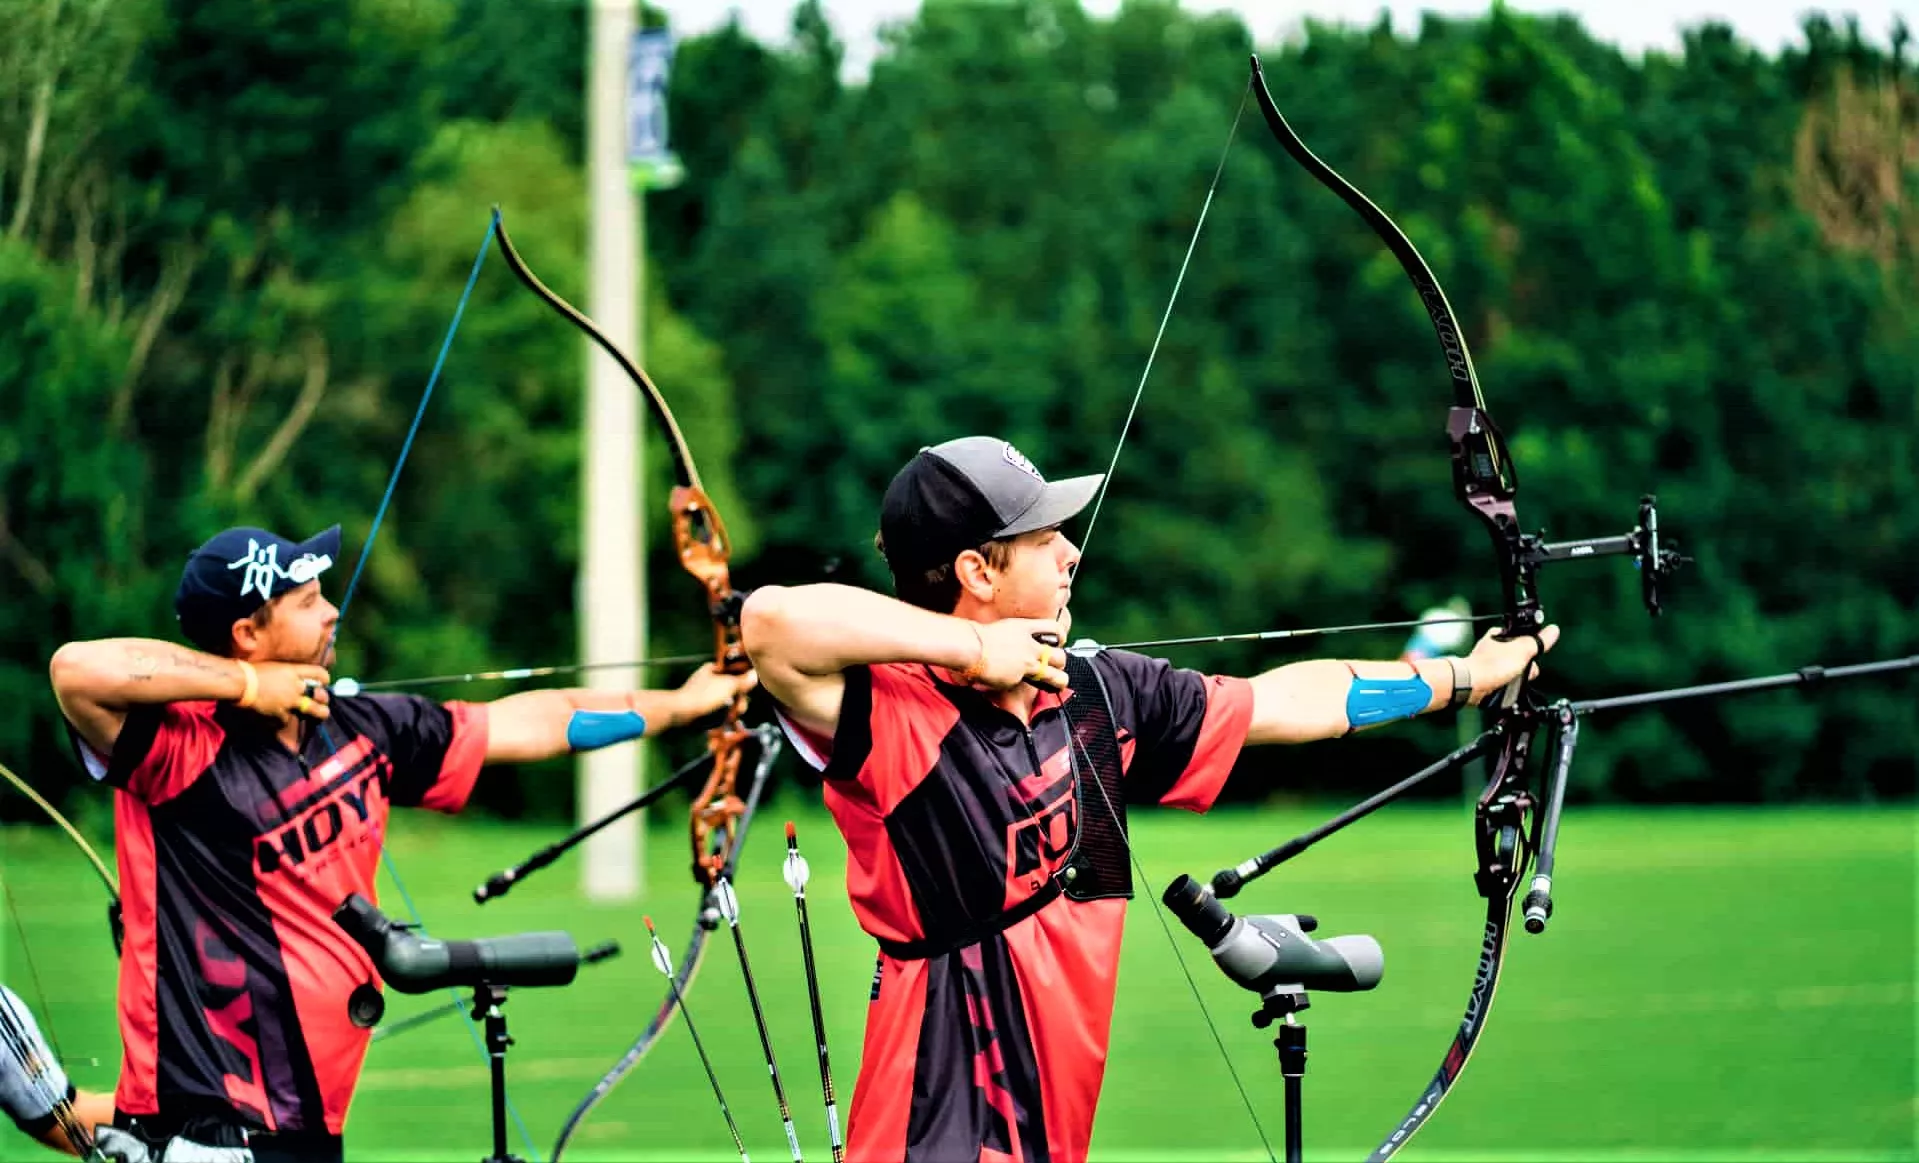 Massey Archery Club in New Zealand, Australia and Oceania | Archery - Rated 1.1